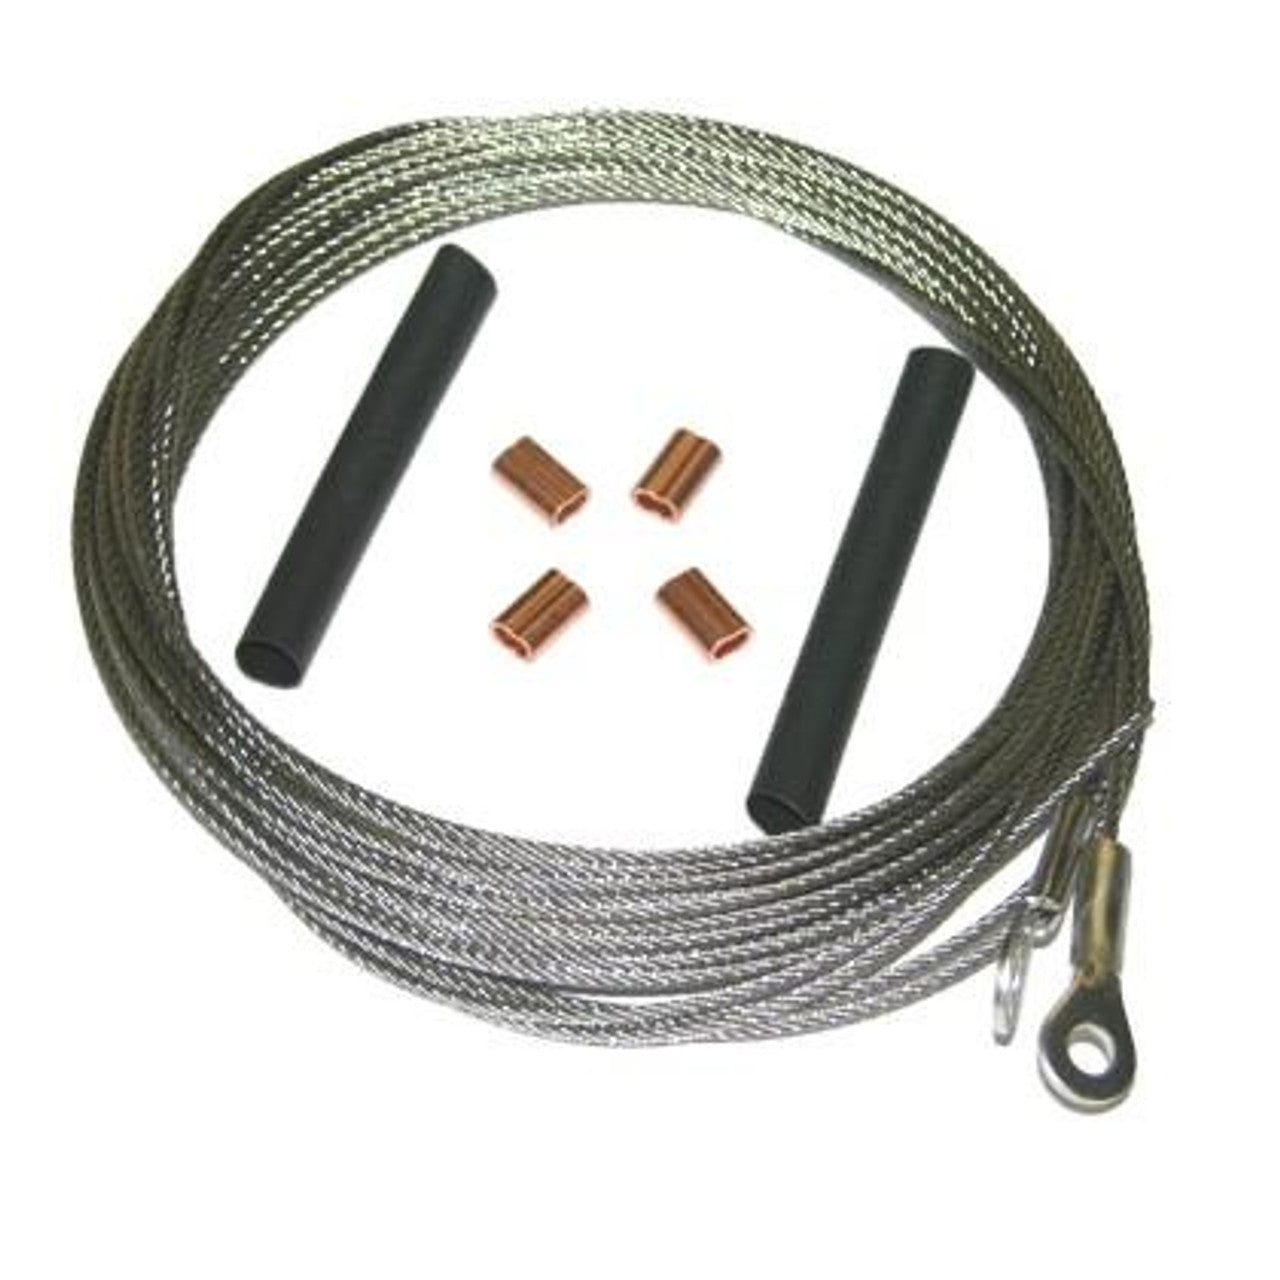 Harmony Rudder Cable Kit w/ Swedges